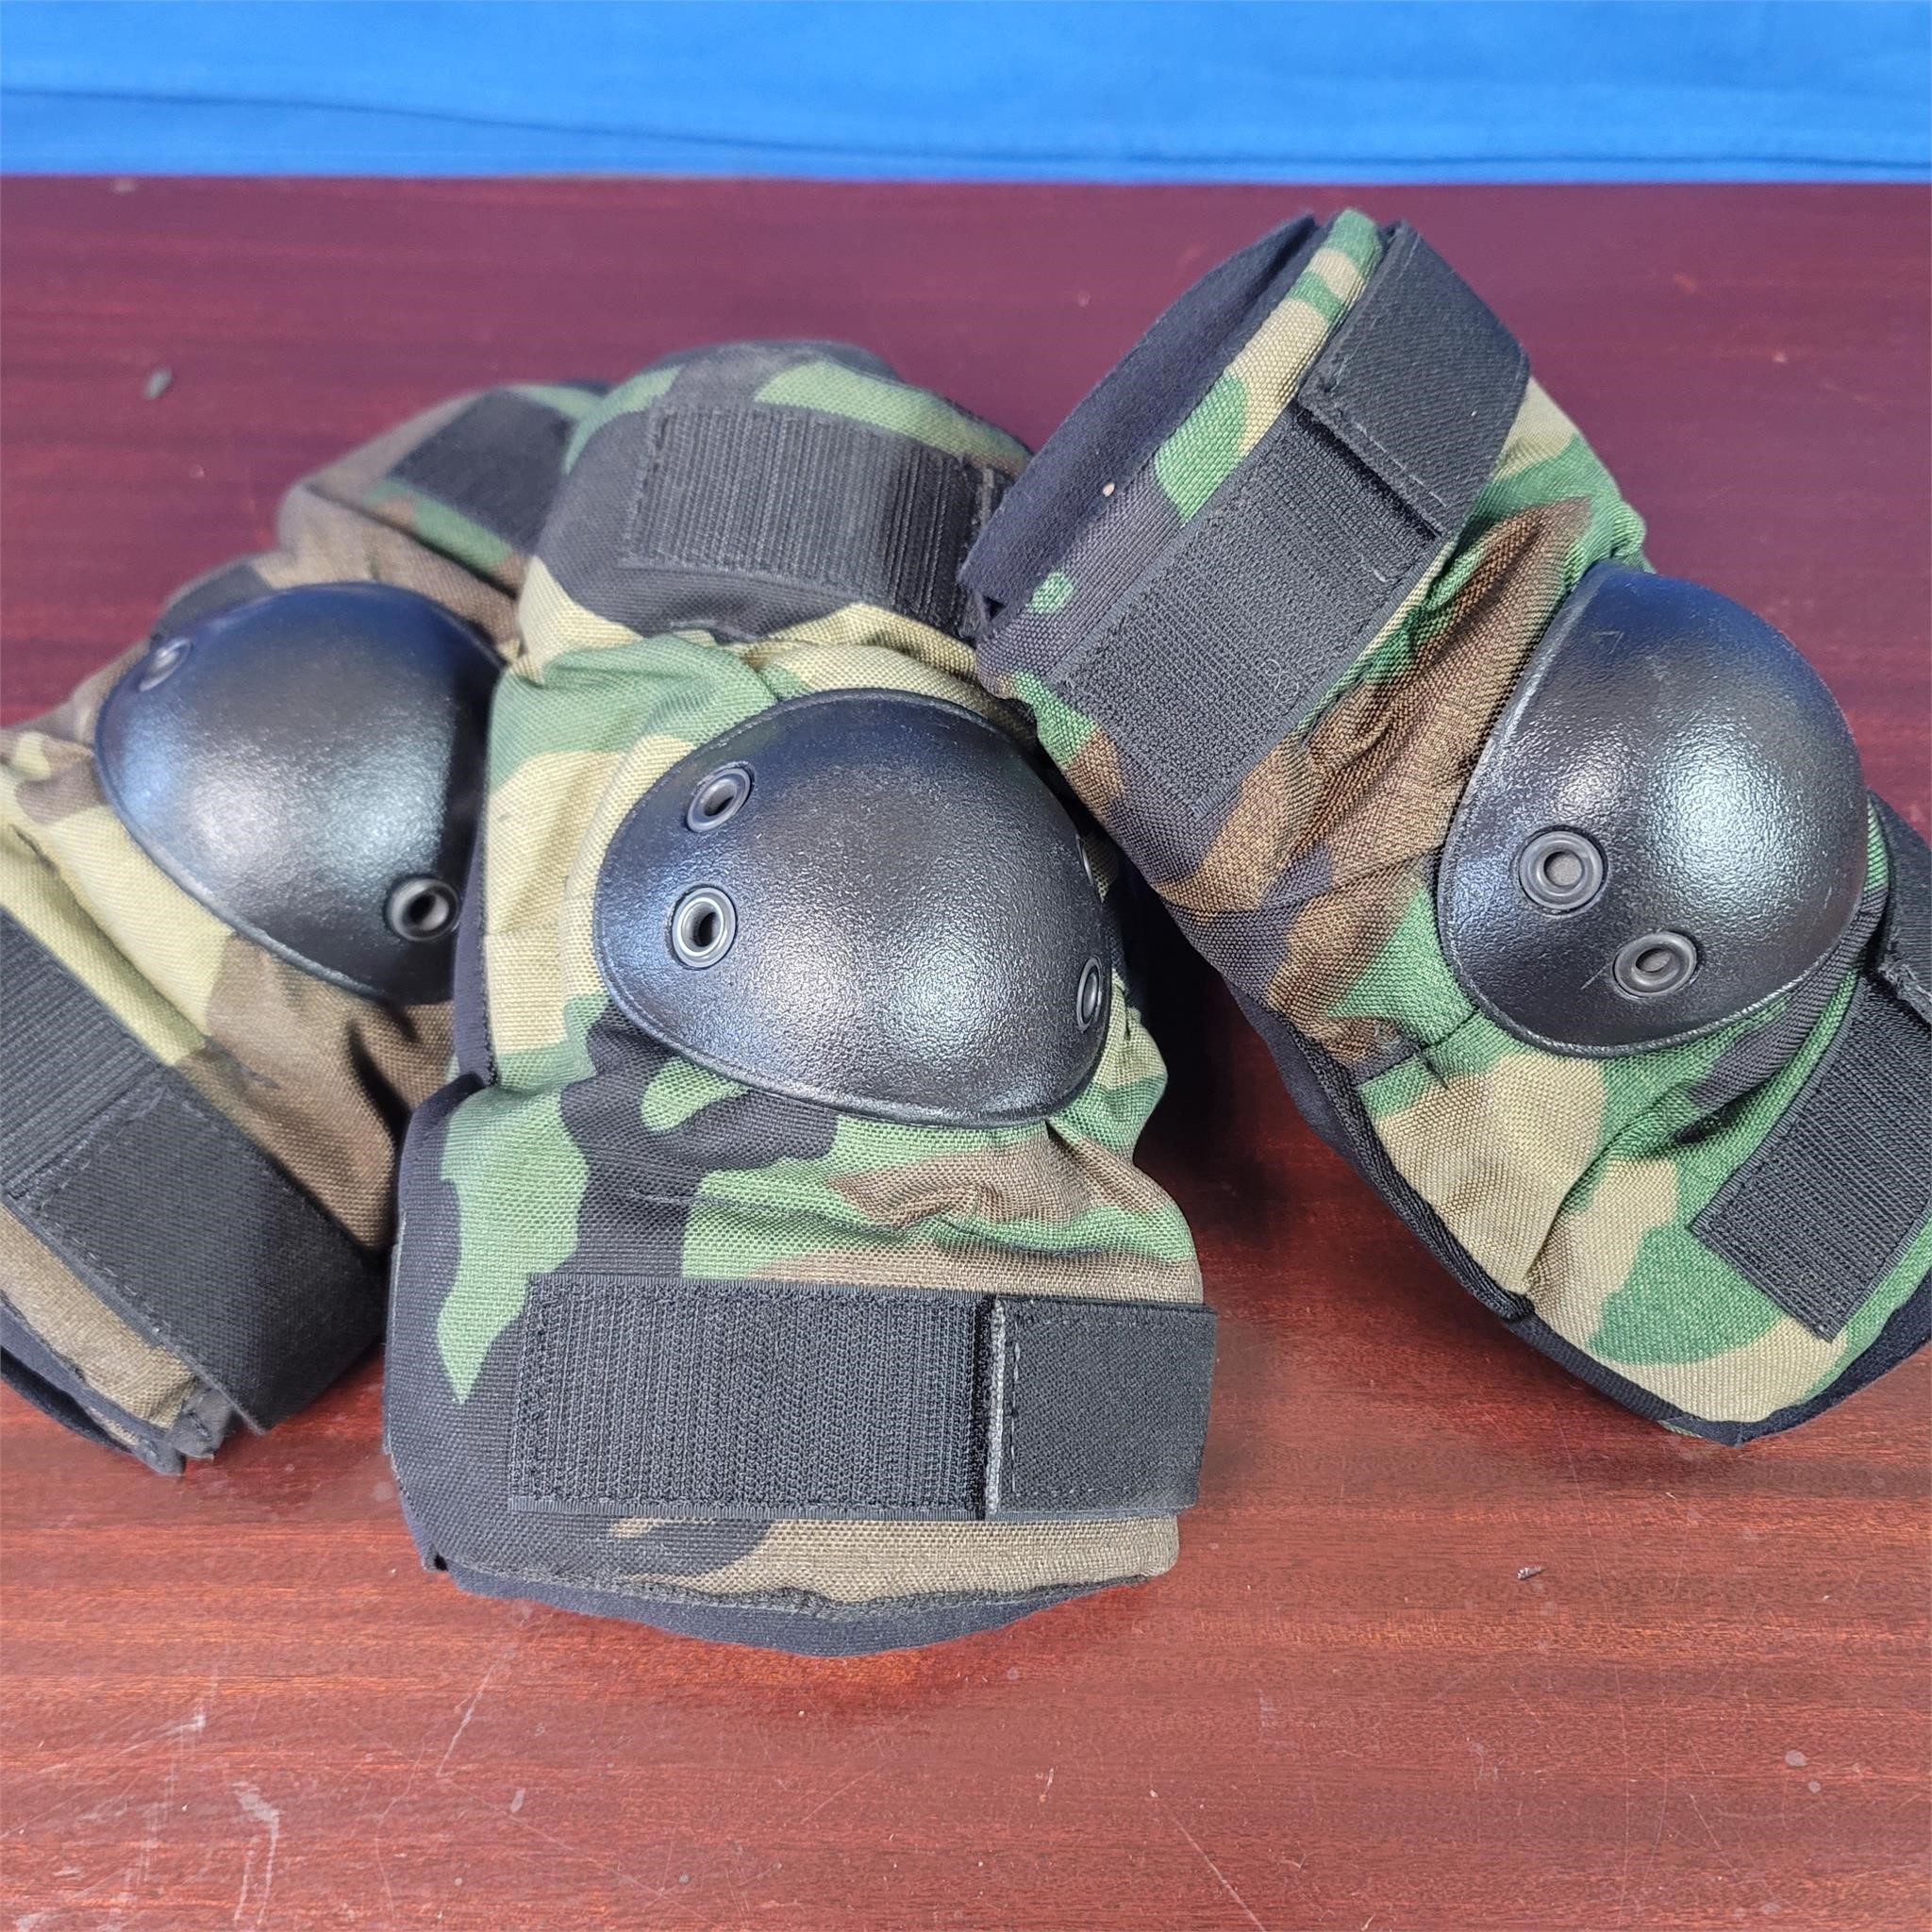 3 Sets of Camo Elbow Pads